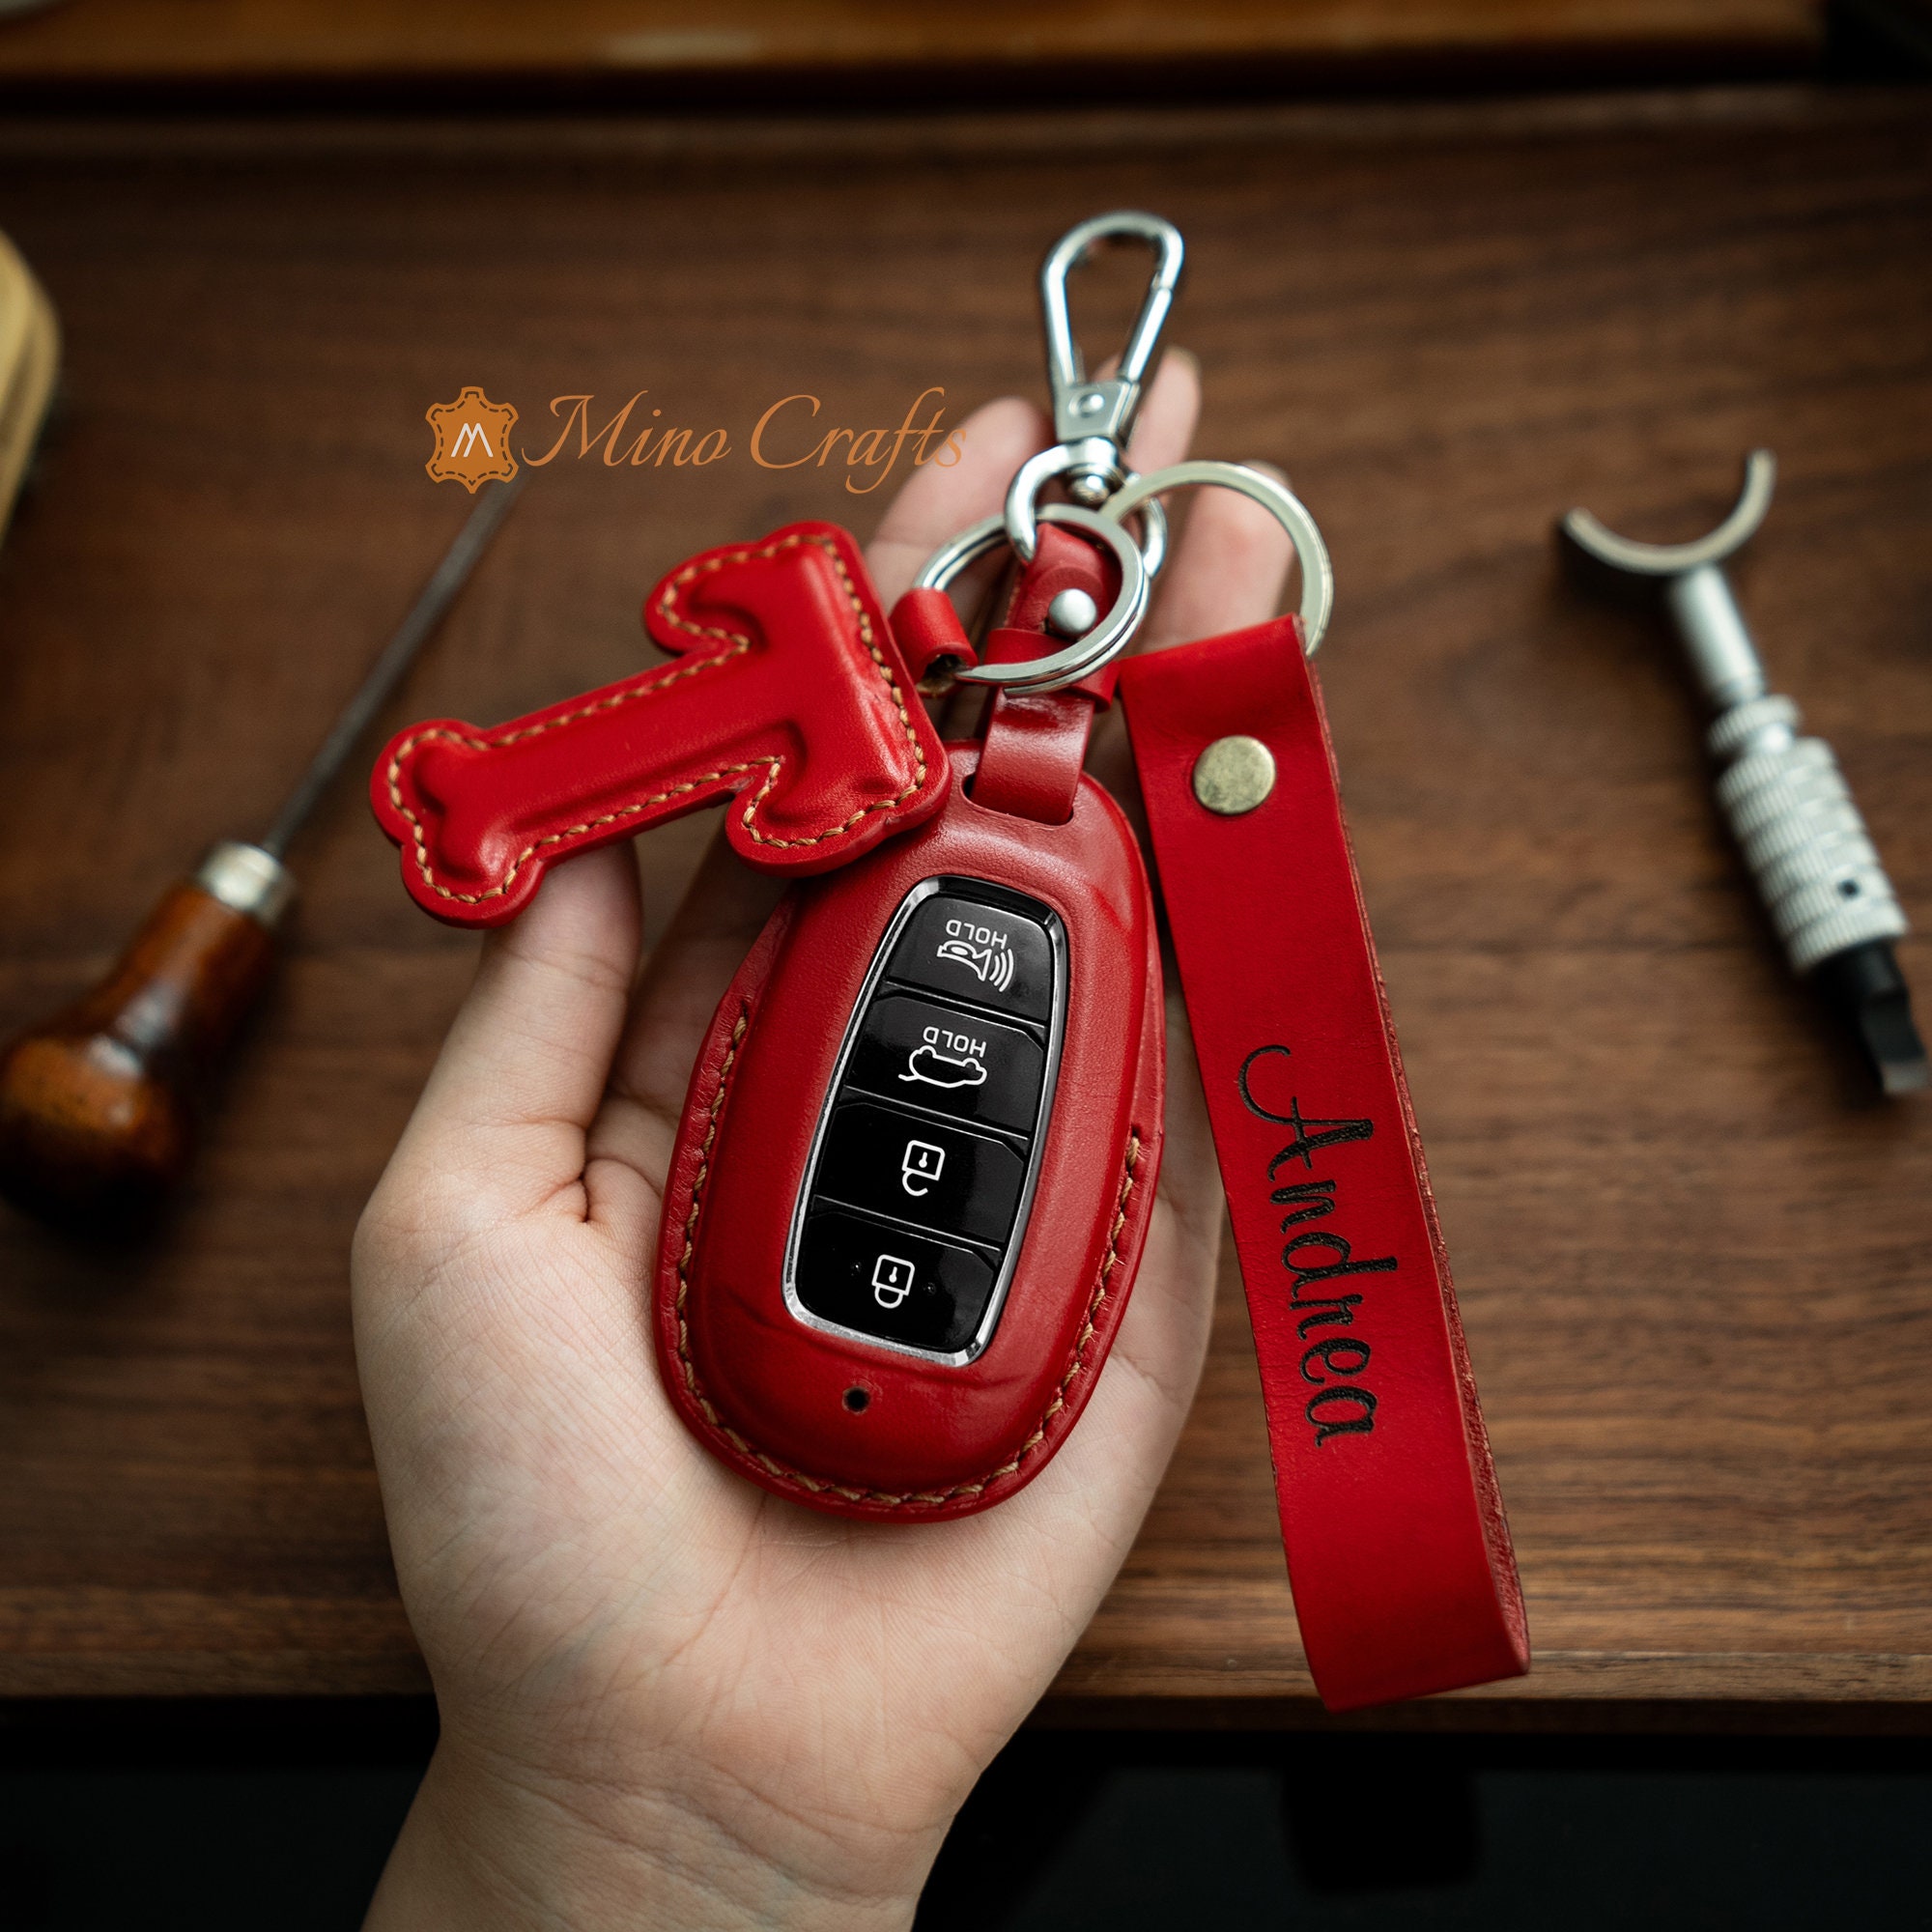 Auto Car Keychain Leather Business Key Chain for Key Fob and Key With Key  Ring and Metal Carabiner Hook, Land Rover price in UAE,  UAE